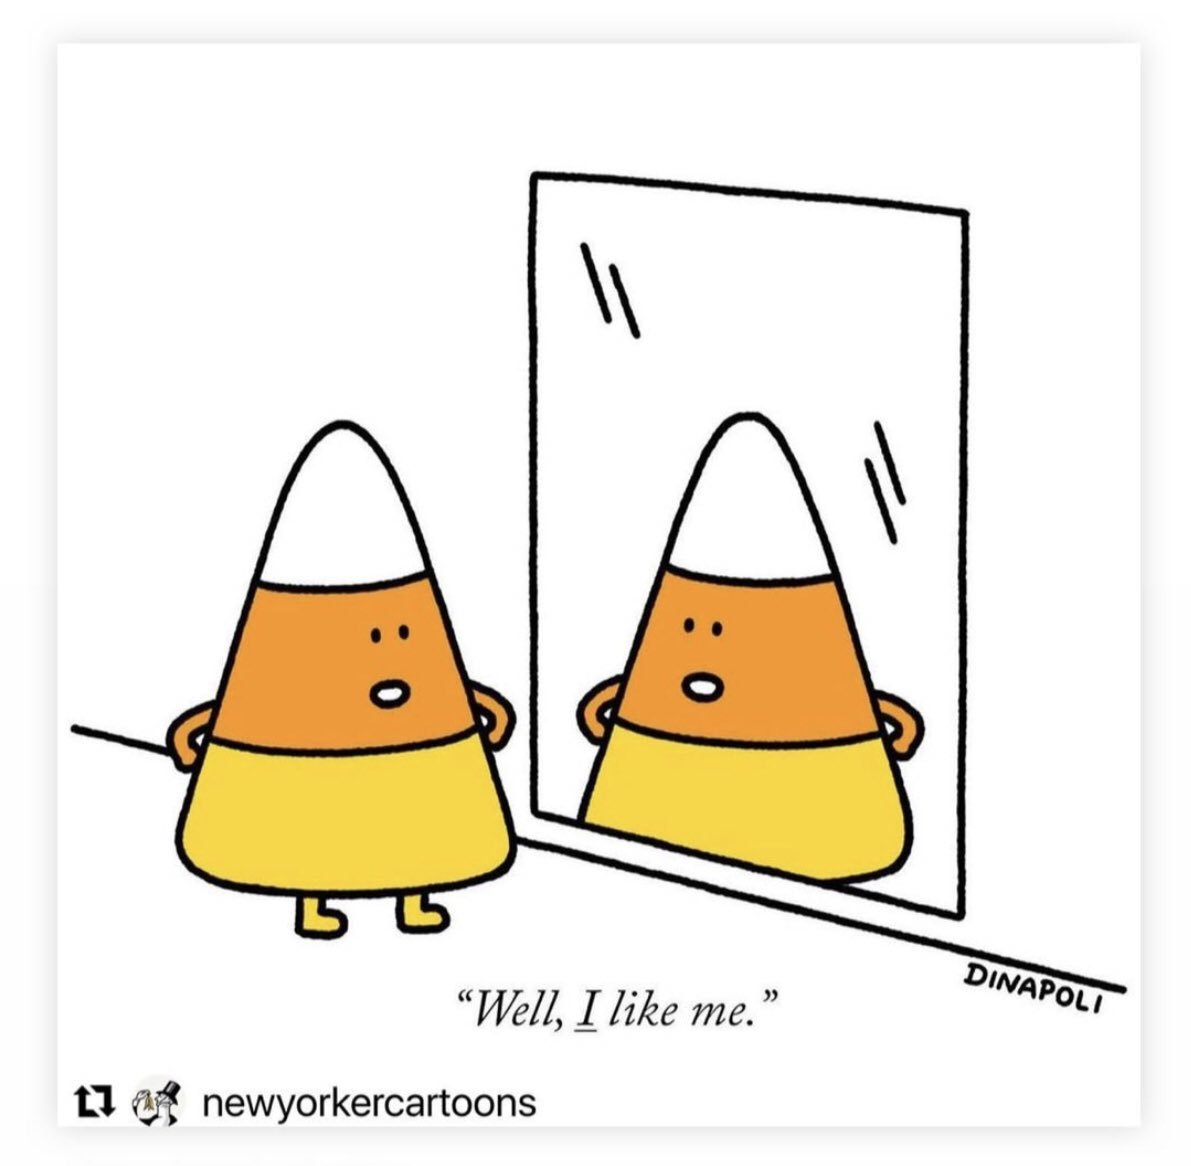 Cartoon of a candy corn kernel looking into a mirror: "Well, *I* like me."